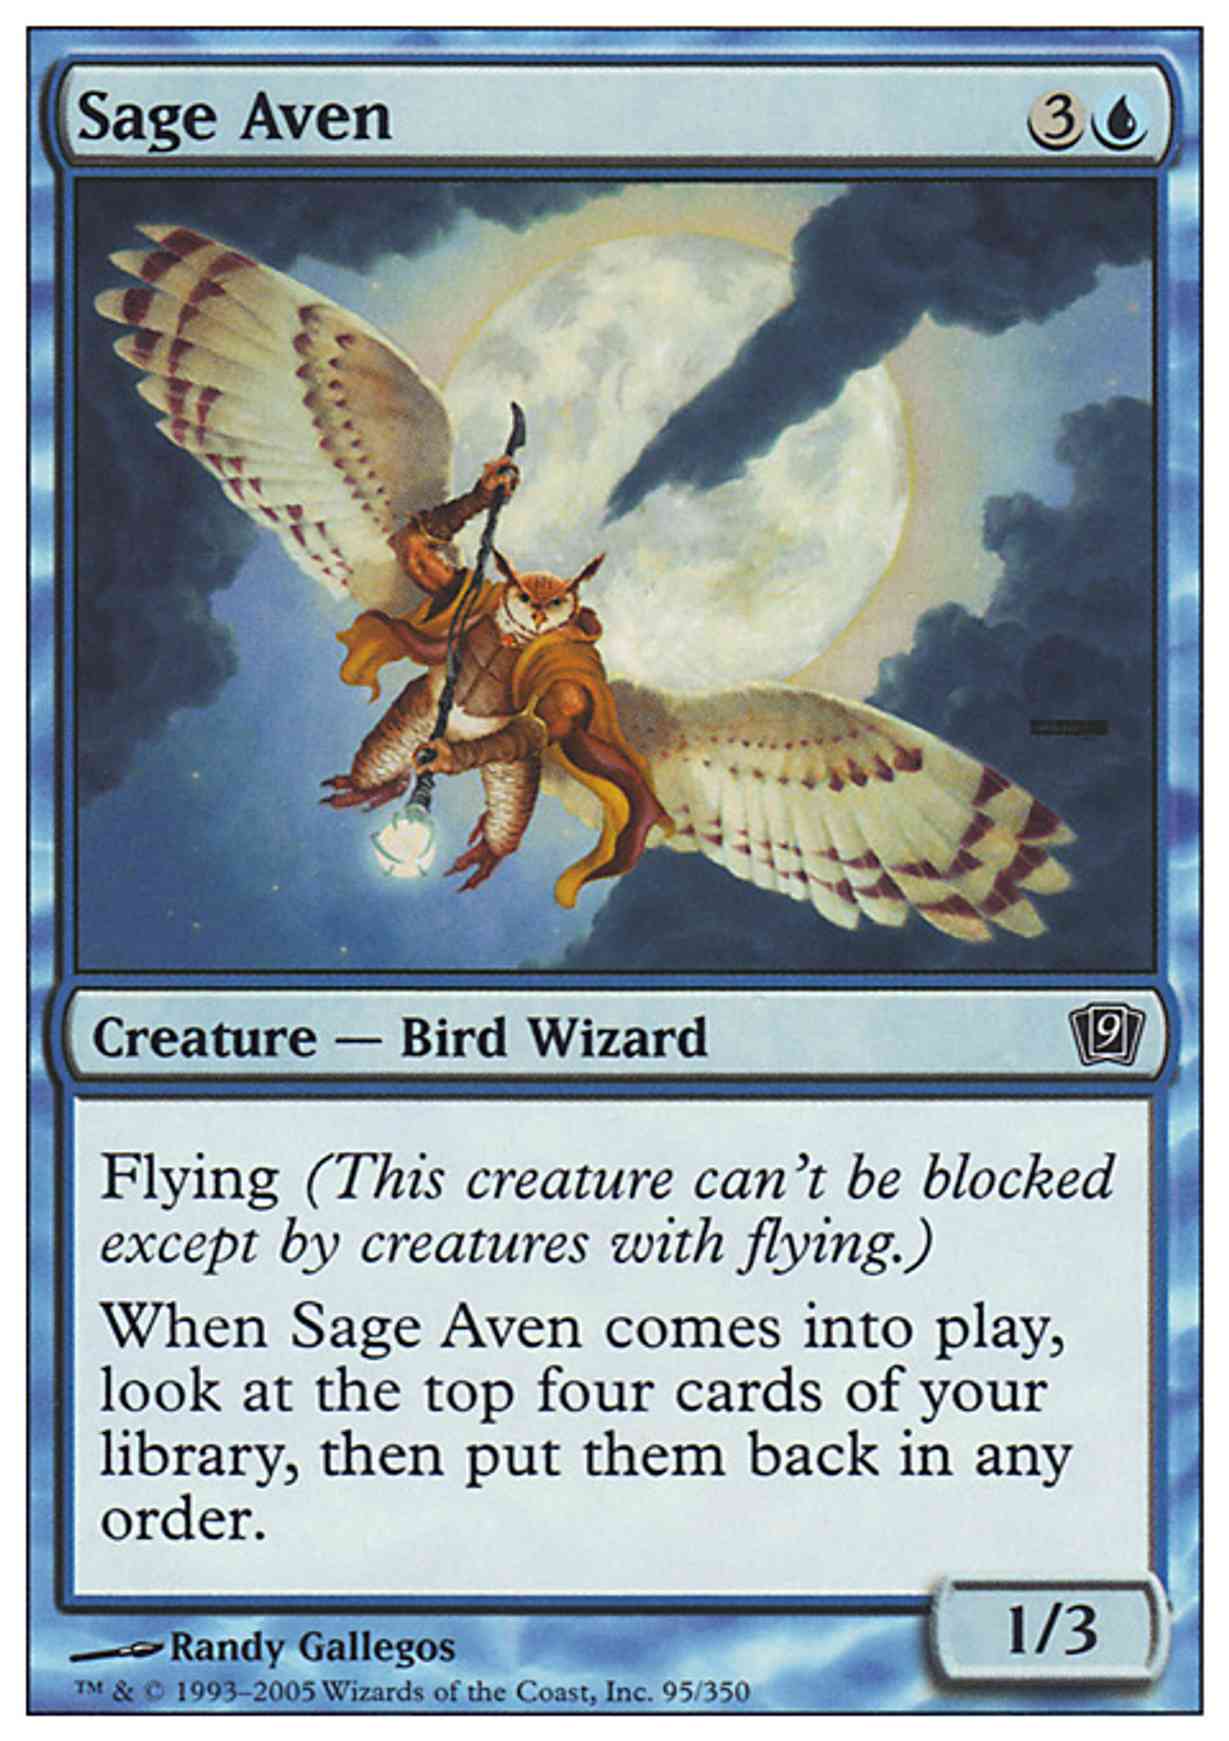 Sage Aven magic card front